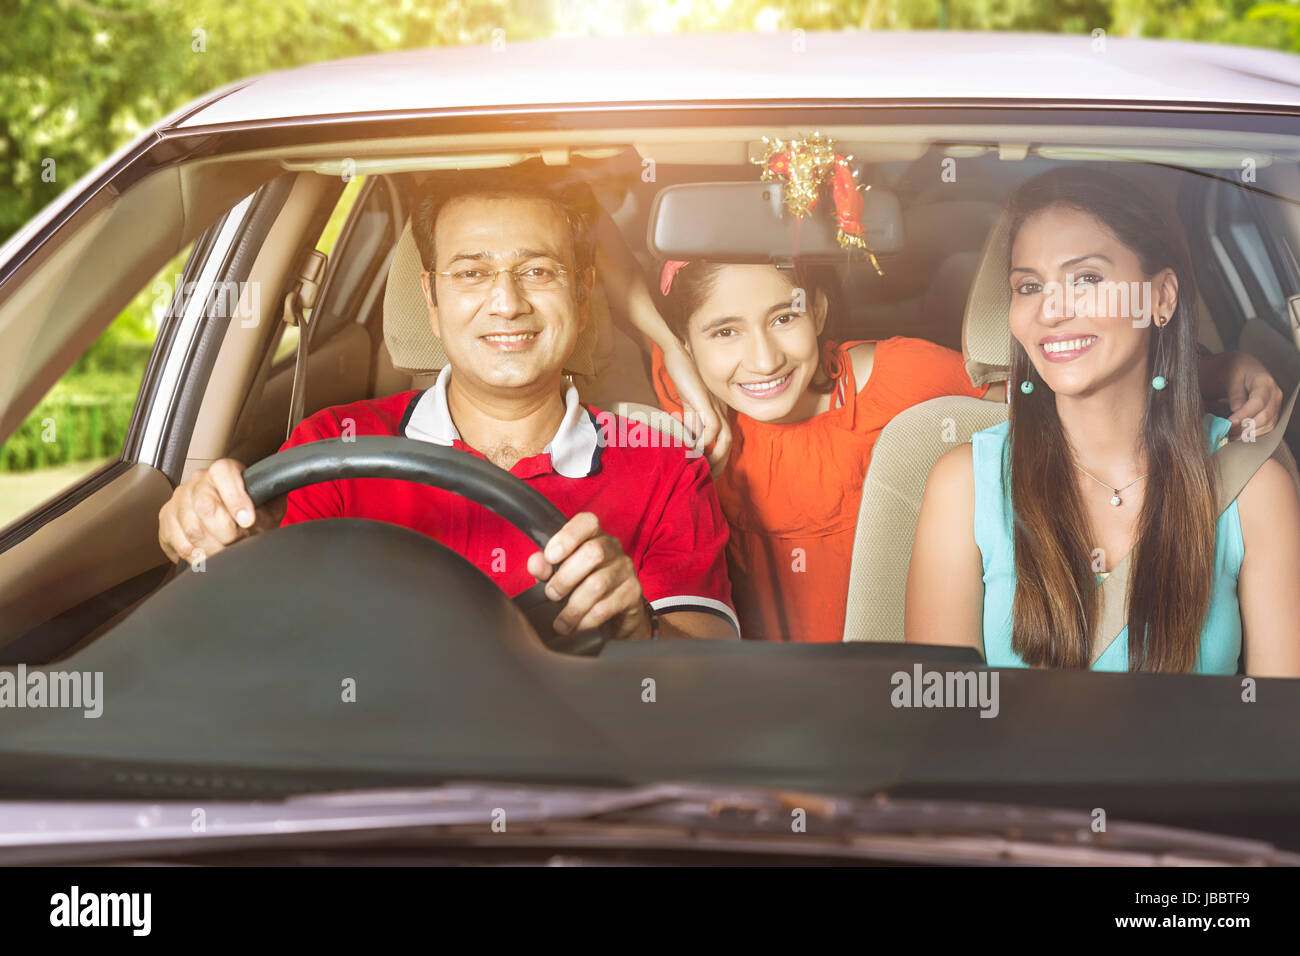 3 People Car Father Girl Journey Mother Sitting Smiling Together Travel Stock Photo